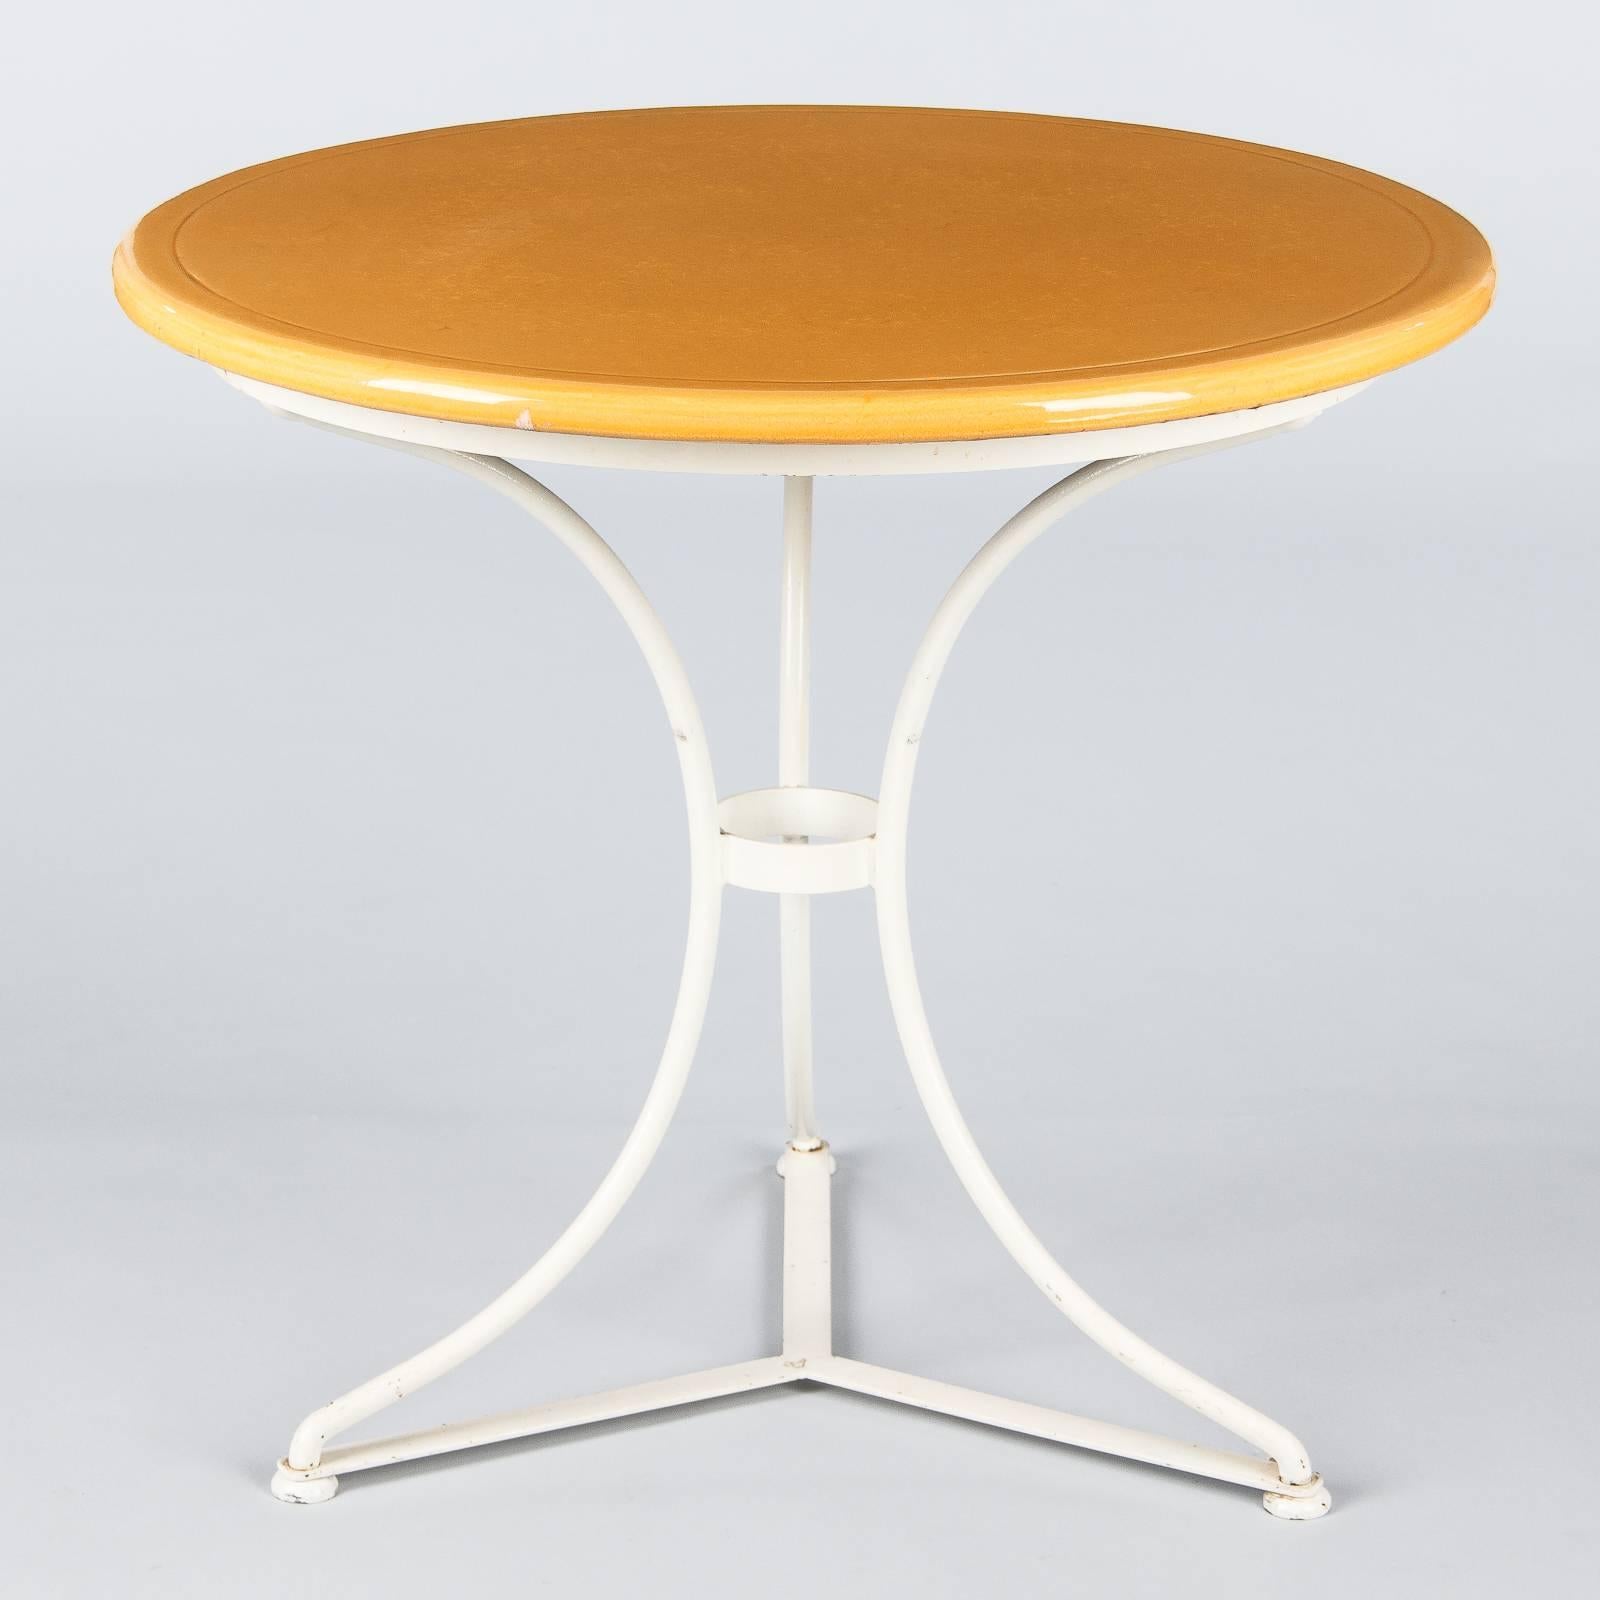 Mid-20th Century French Round Iron Table with Enameled Lava Top, 1960s